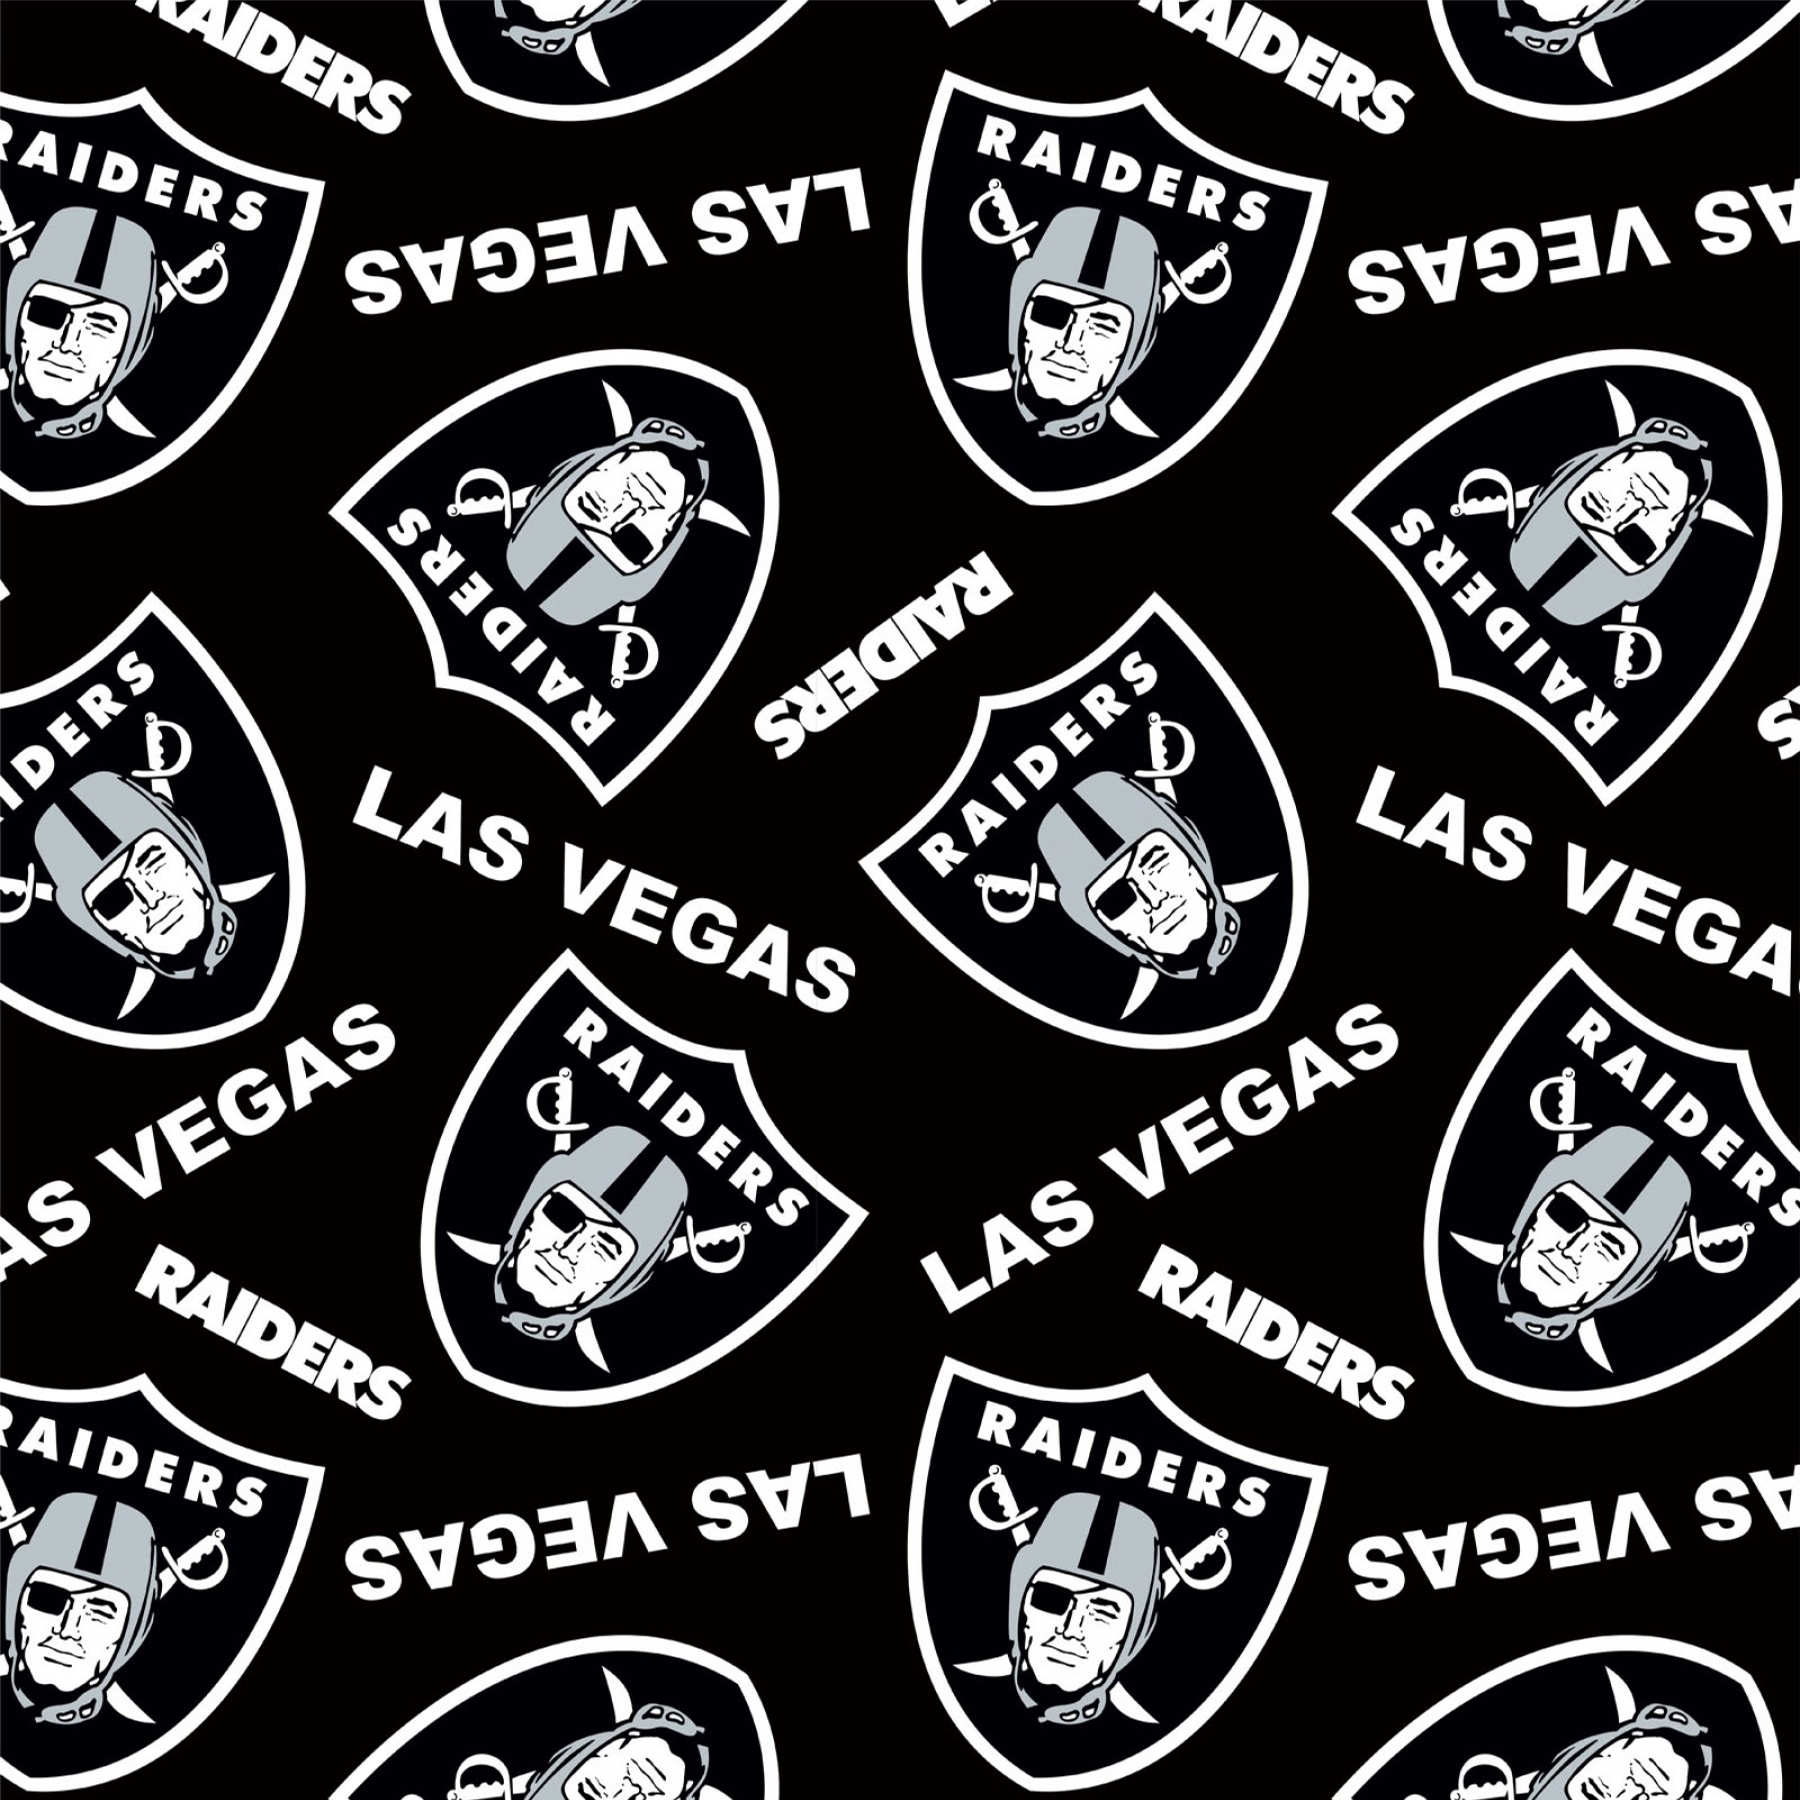 LAS VEGAS RAIDERS - Embroidered NFL / '47 CLOSER One Size